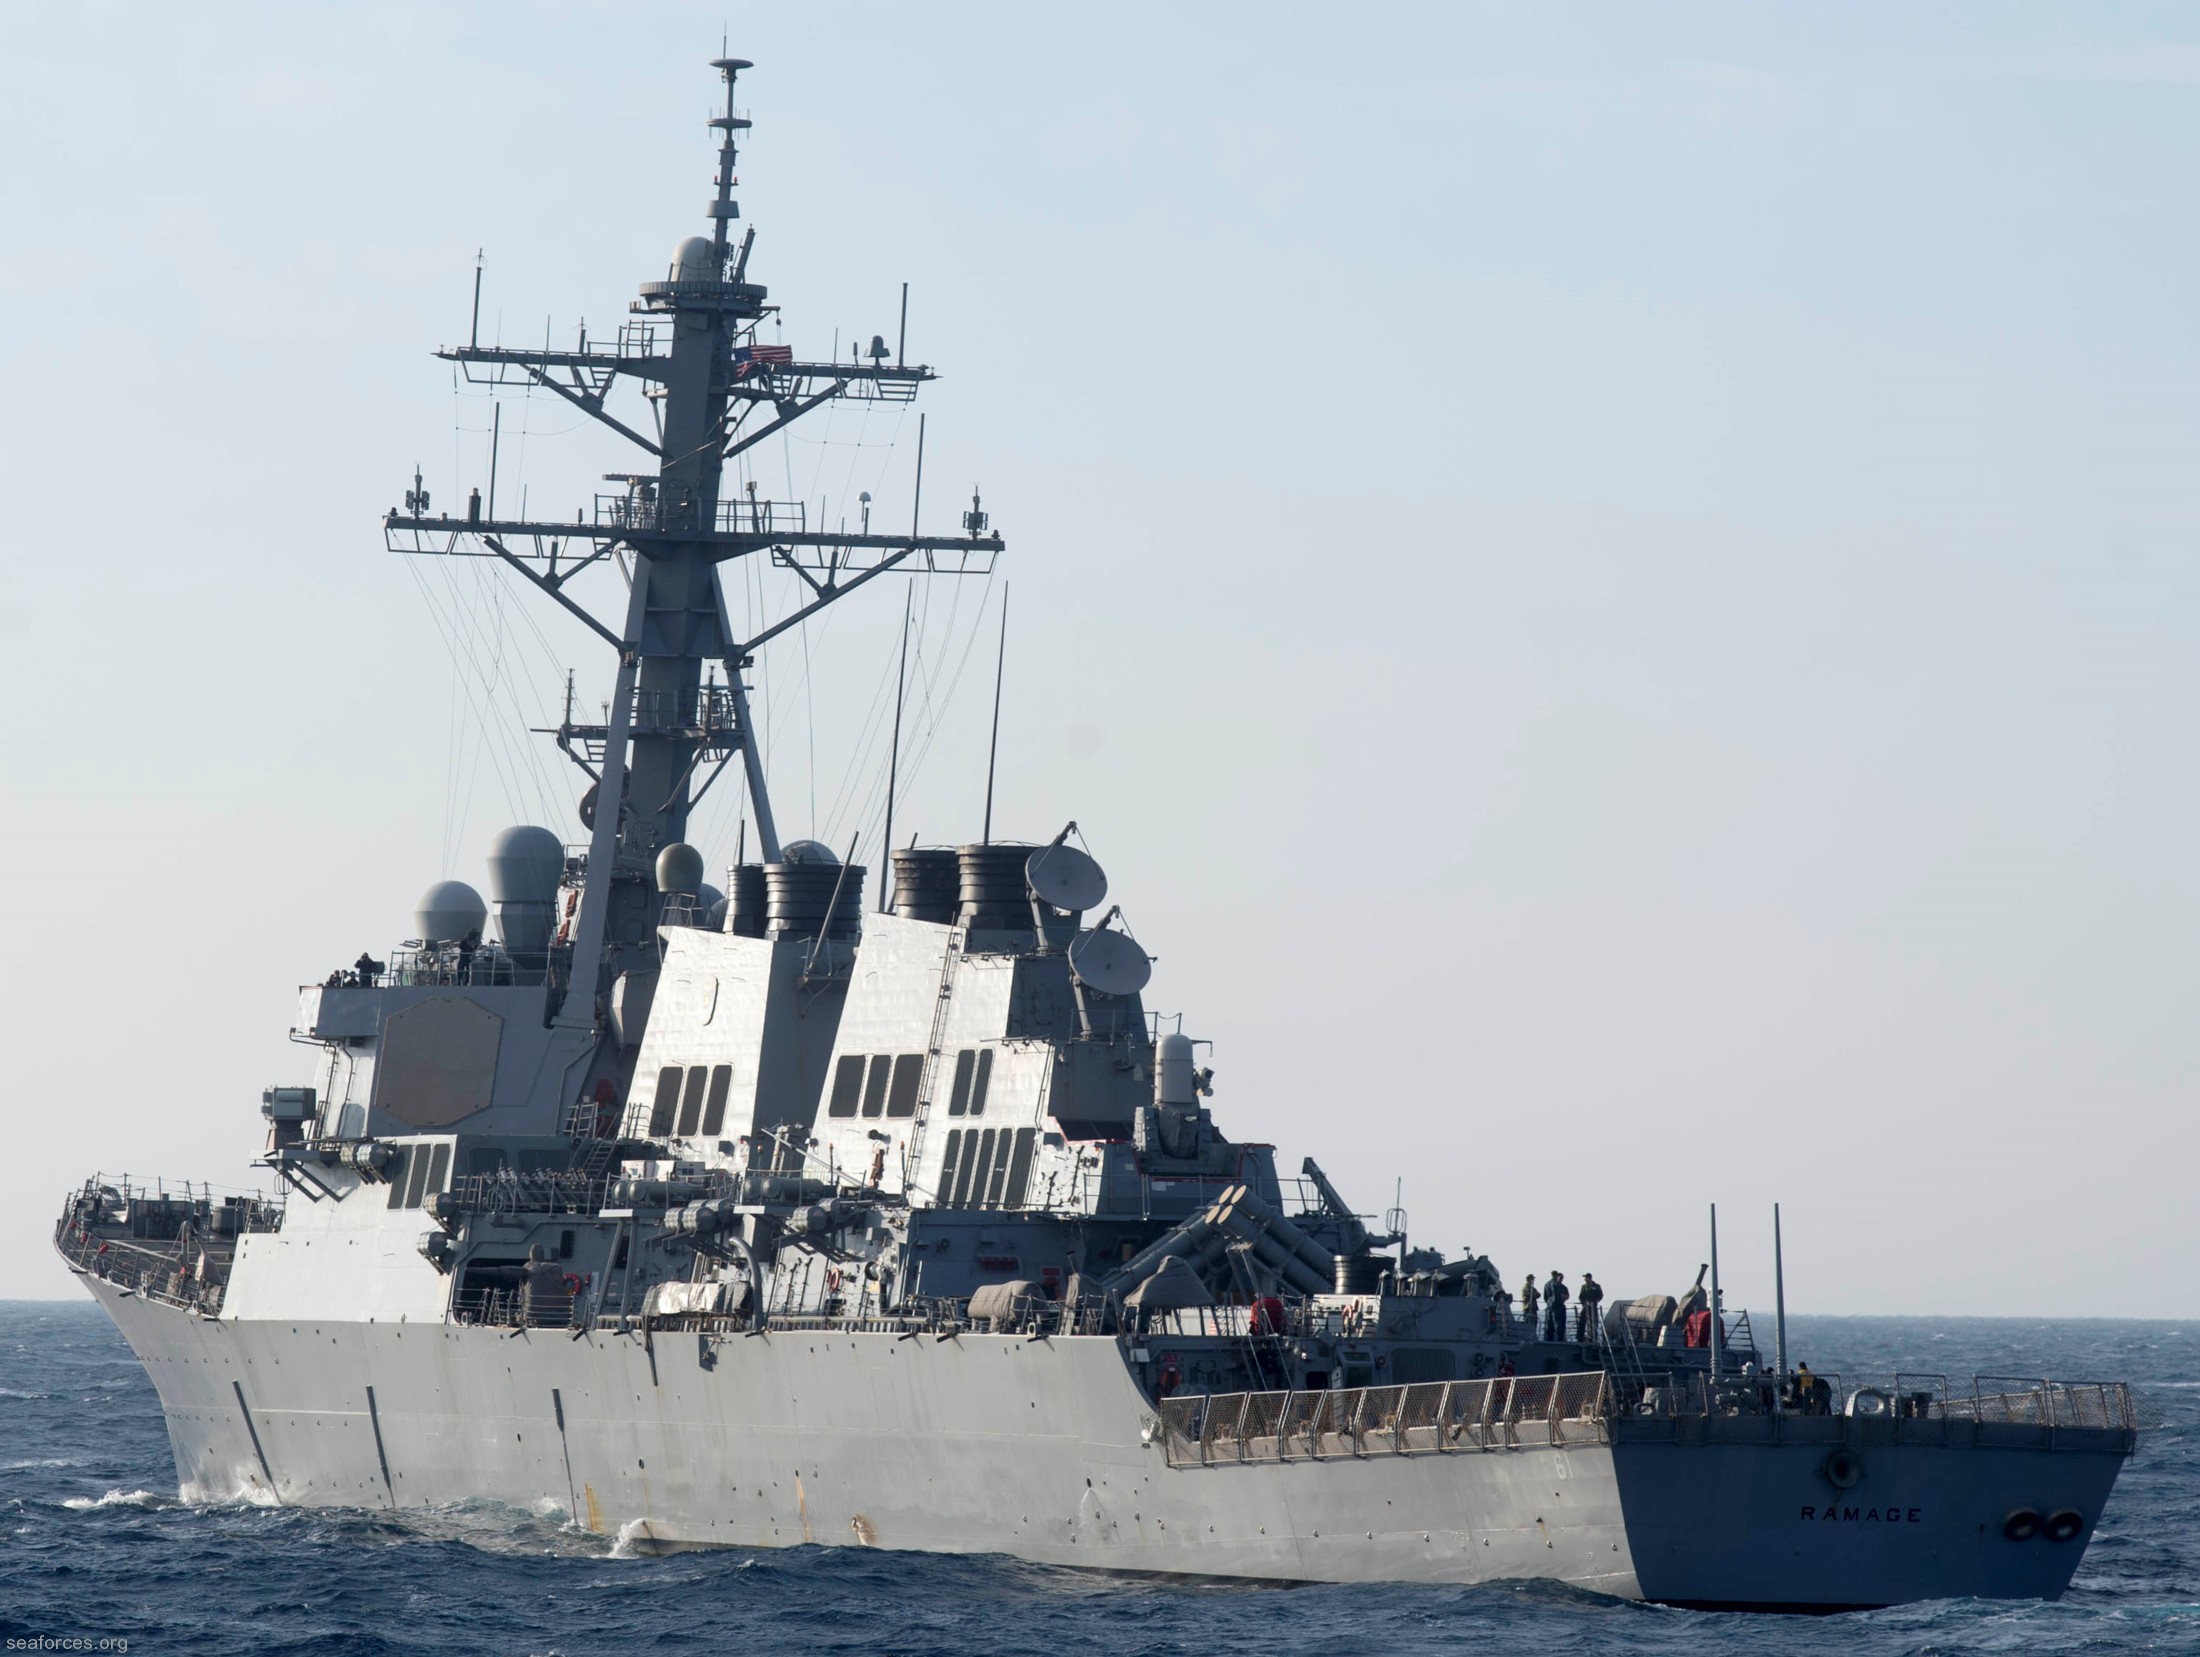 ddg-61 uss ramage guided missile destroyer us navy 23